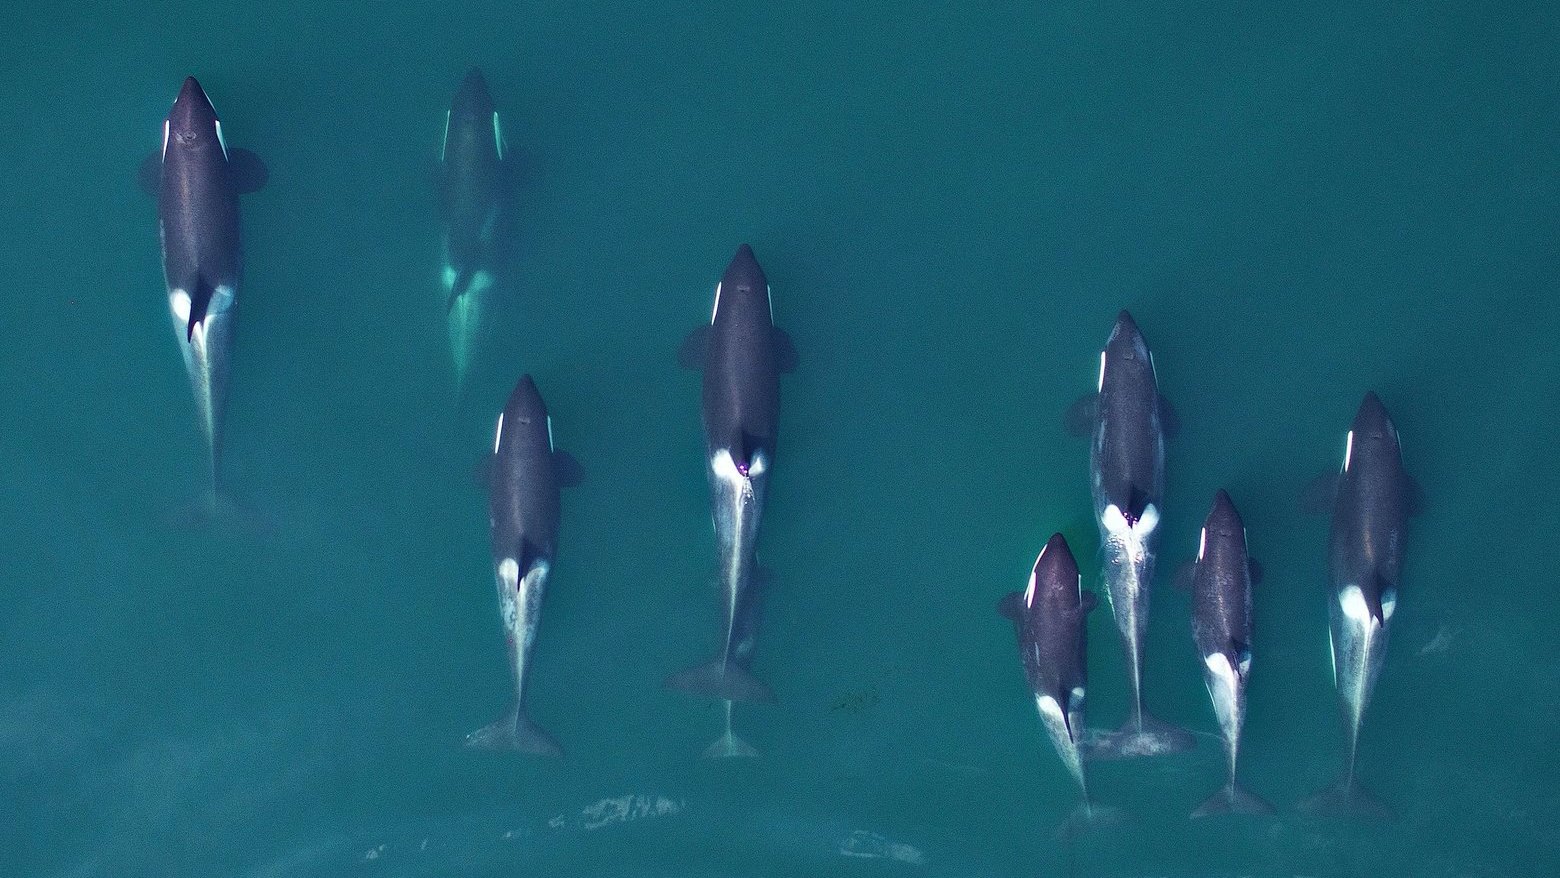 Research with drones shows that Northwest killer whales are shrinking